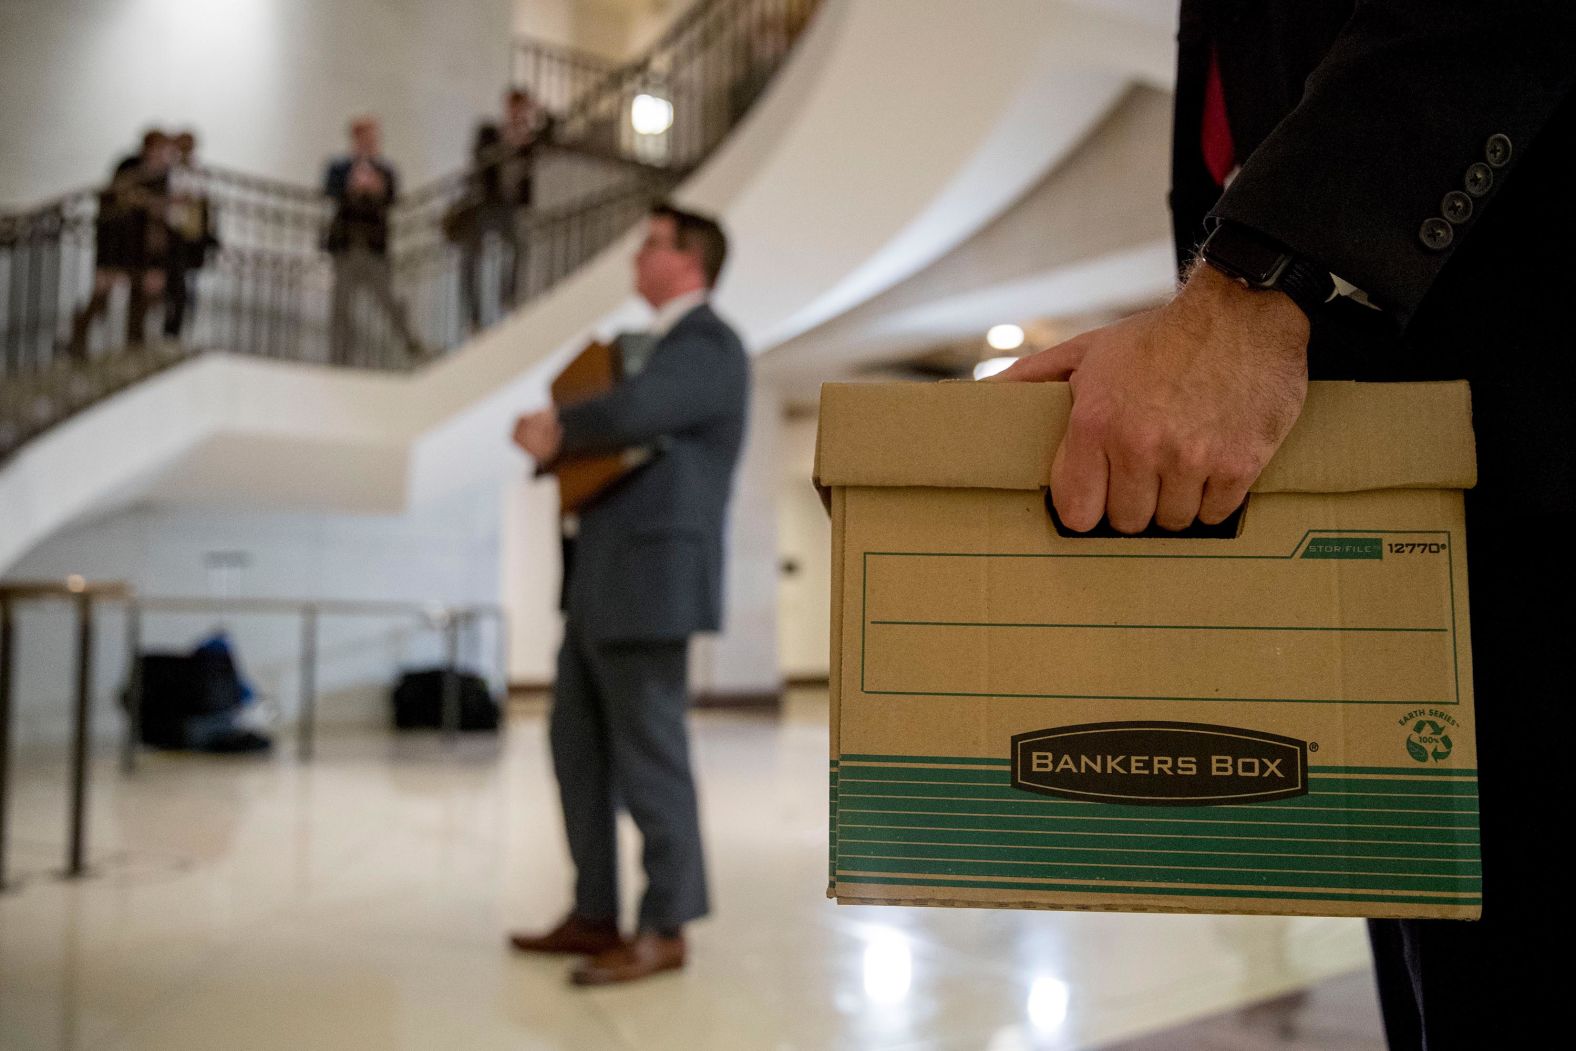 Staff members hold files as US Reps. Jim Jordan and Lee Zeldin, both Republicans, speak to reporters on October 14. It was just after Fiona Hill, Trump's former top Russia adviser, <a href="index.php?page=&url=https%3A%2F%2Fwww.cnn.com%2F2019%2F10%2F14%2Fpolitics%2Fwho-is-fiona-hill%2Findex.html" target="_blank">testified before congressional lawmakers.</a>